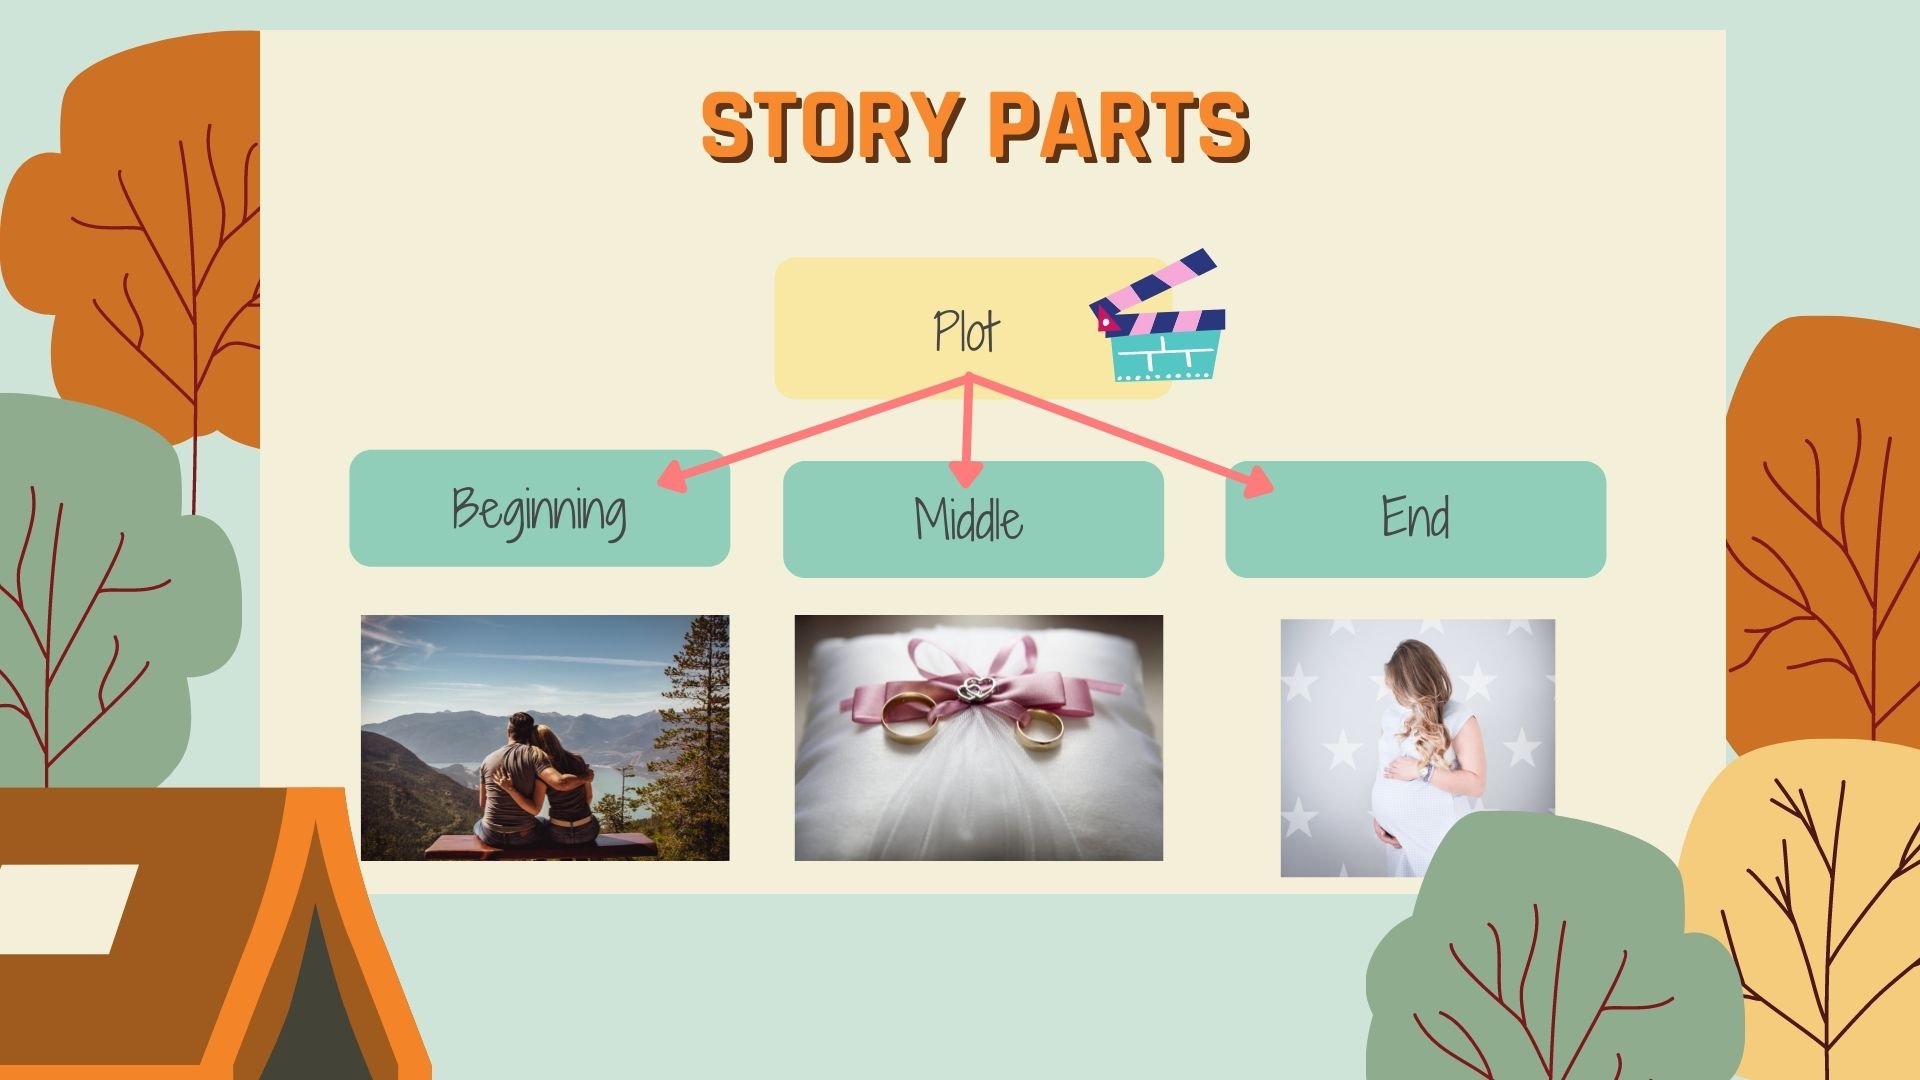 Story parts